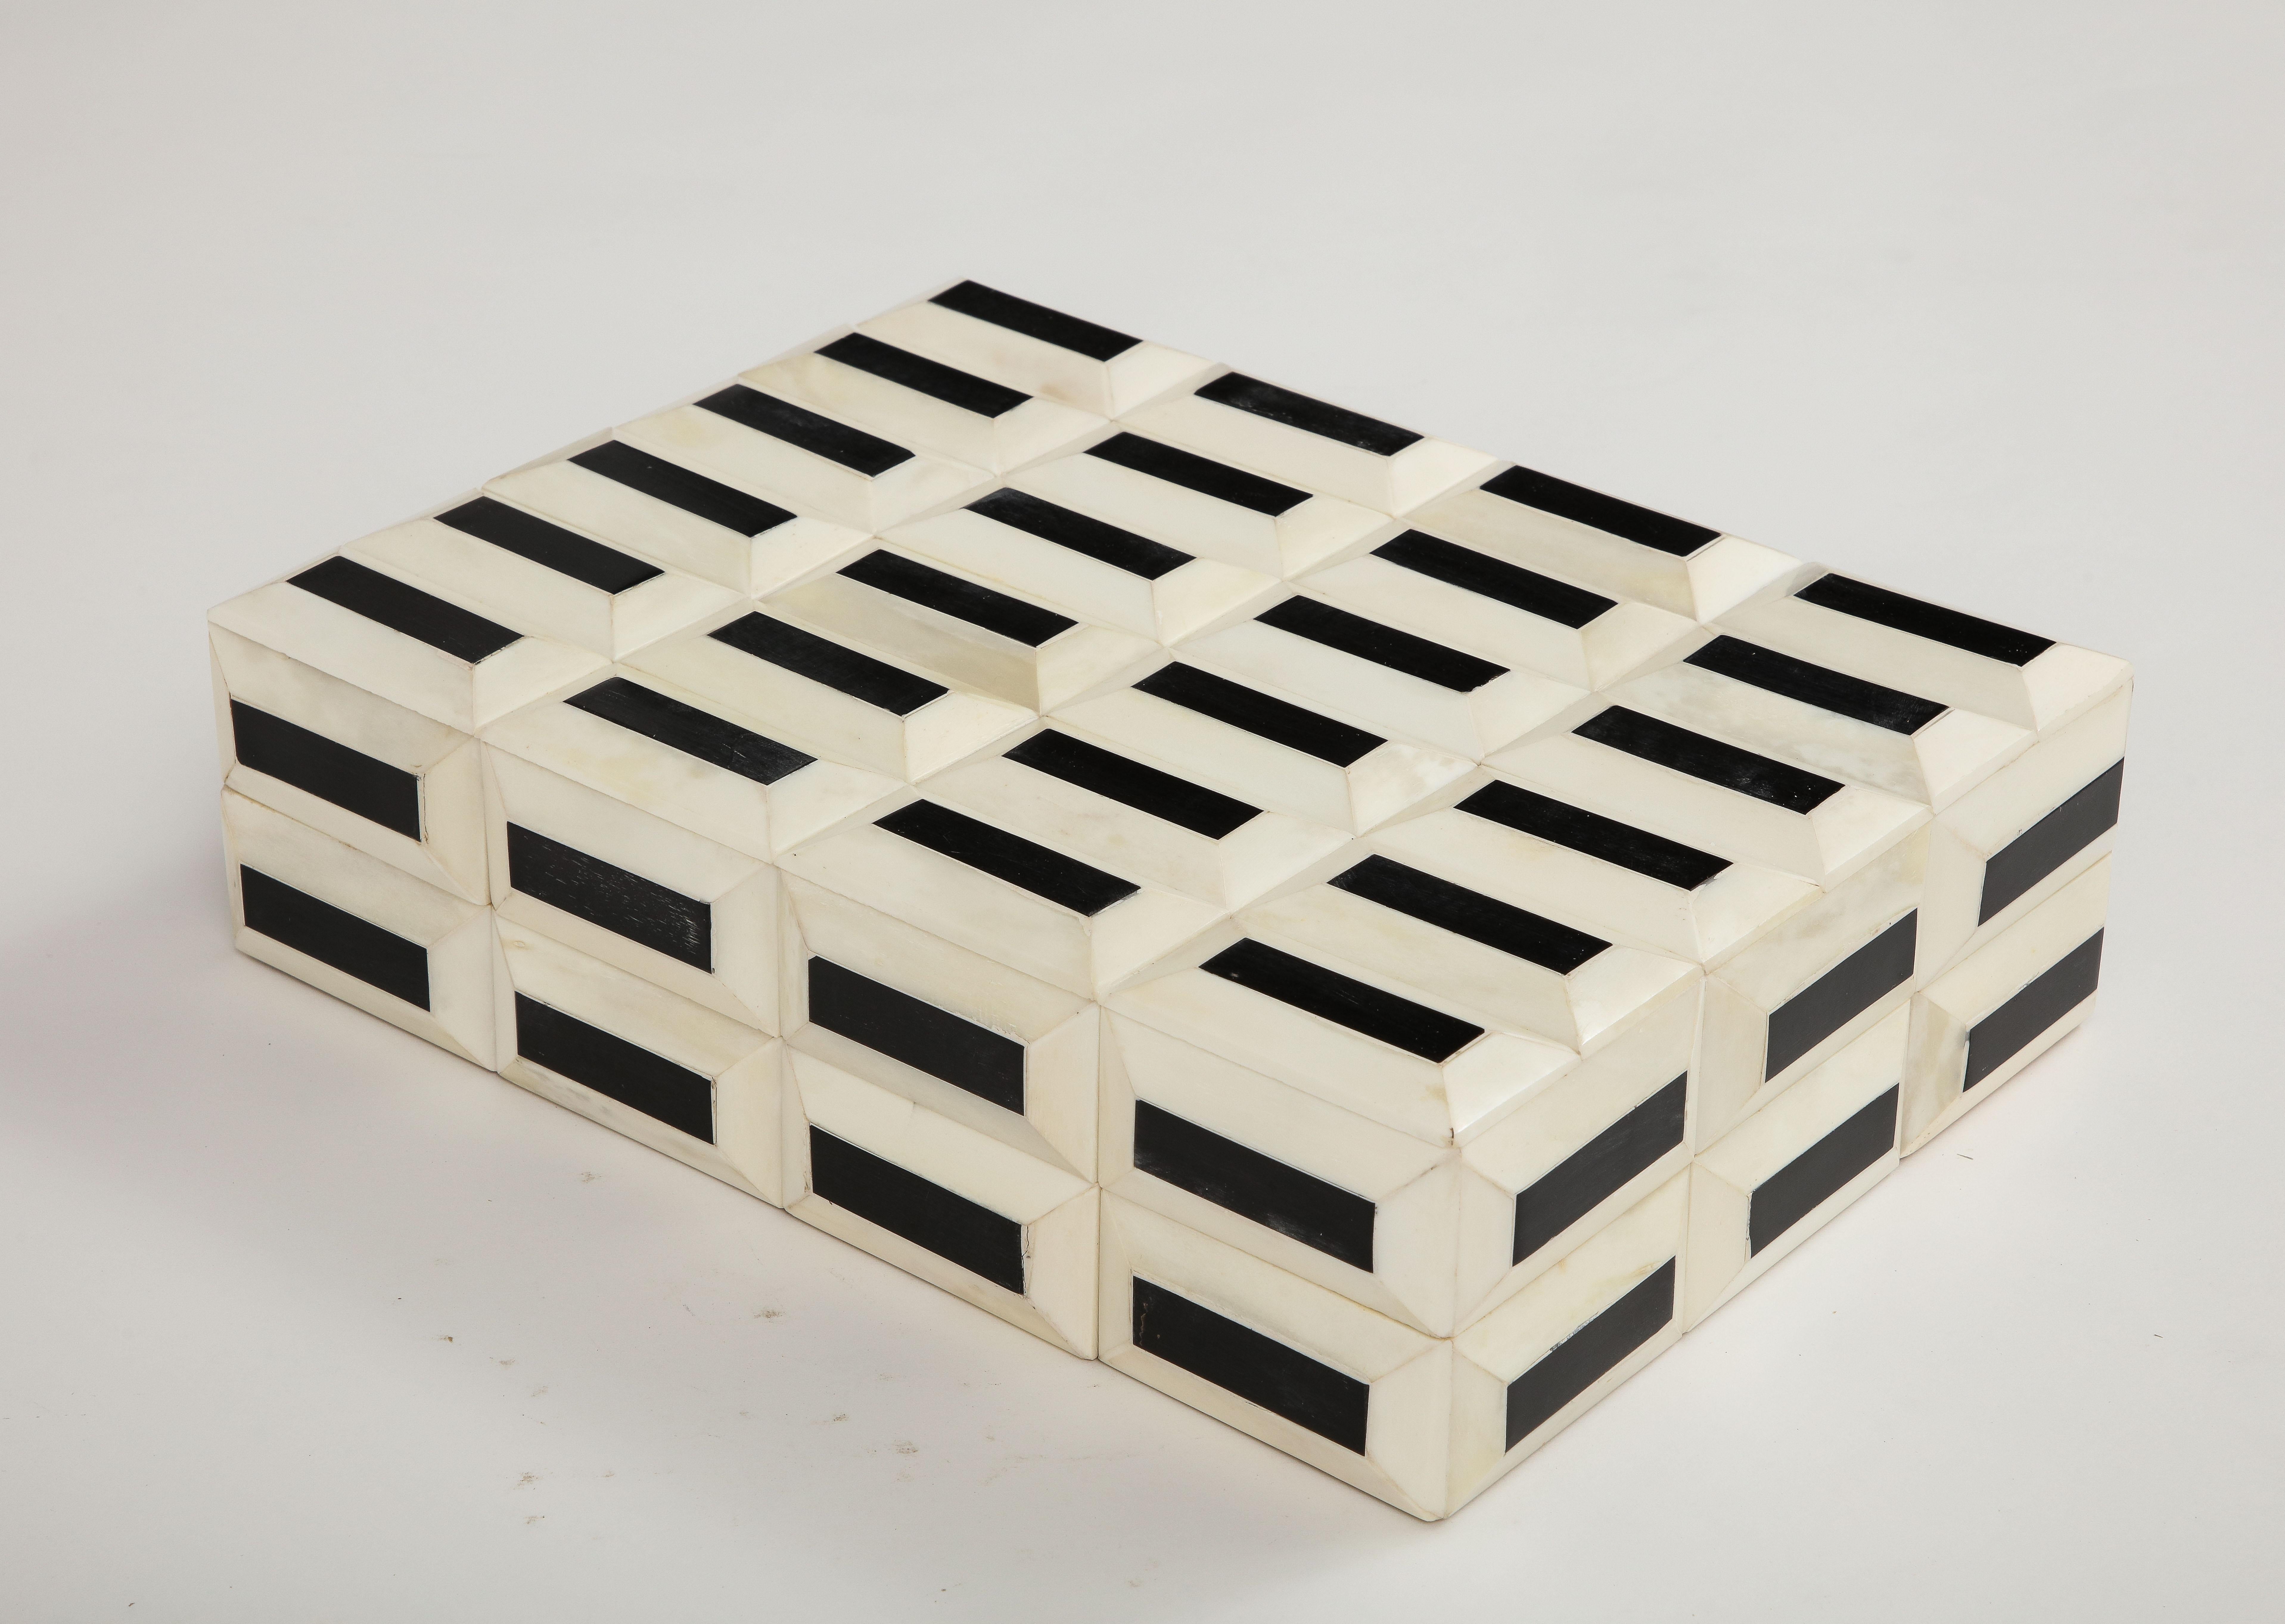 Hand made dimensional bone box with hand set black centers. Rectangular pieces form a dimensional facade, lined in wood. A great addition to any coffee table to store remote controls or desk.